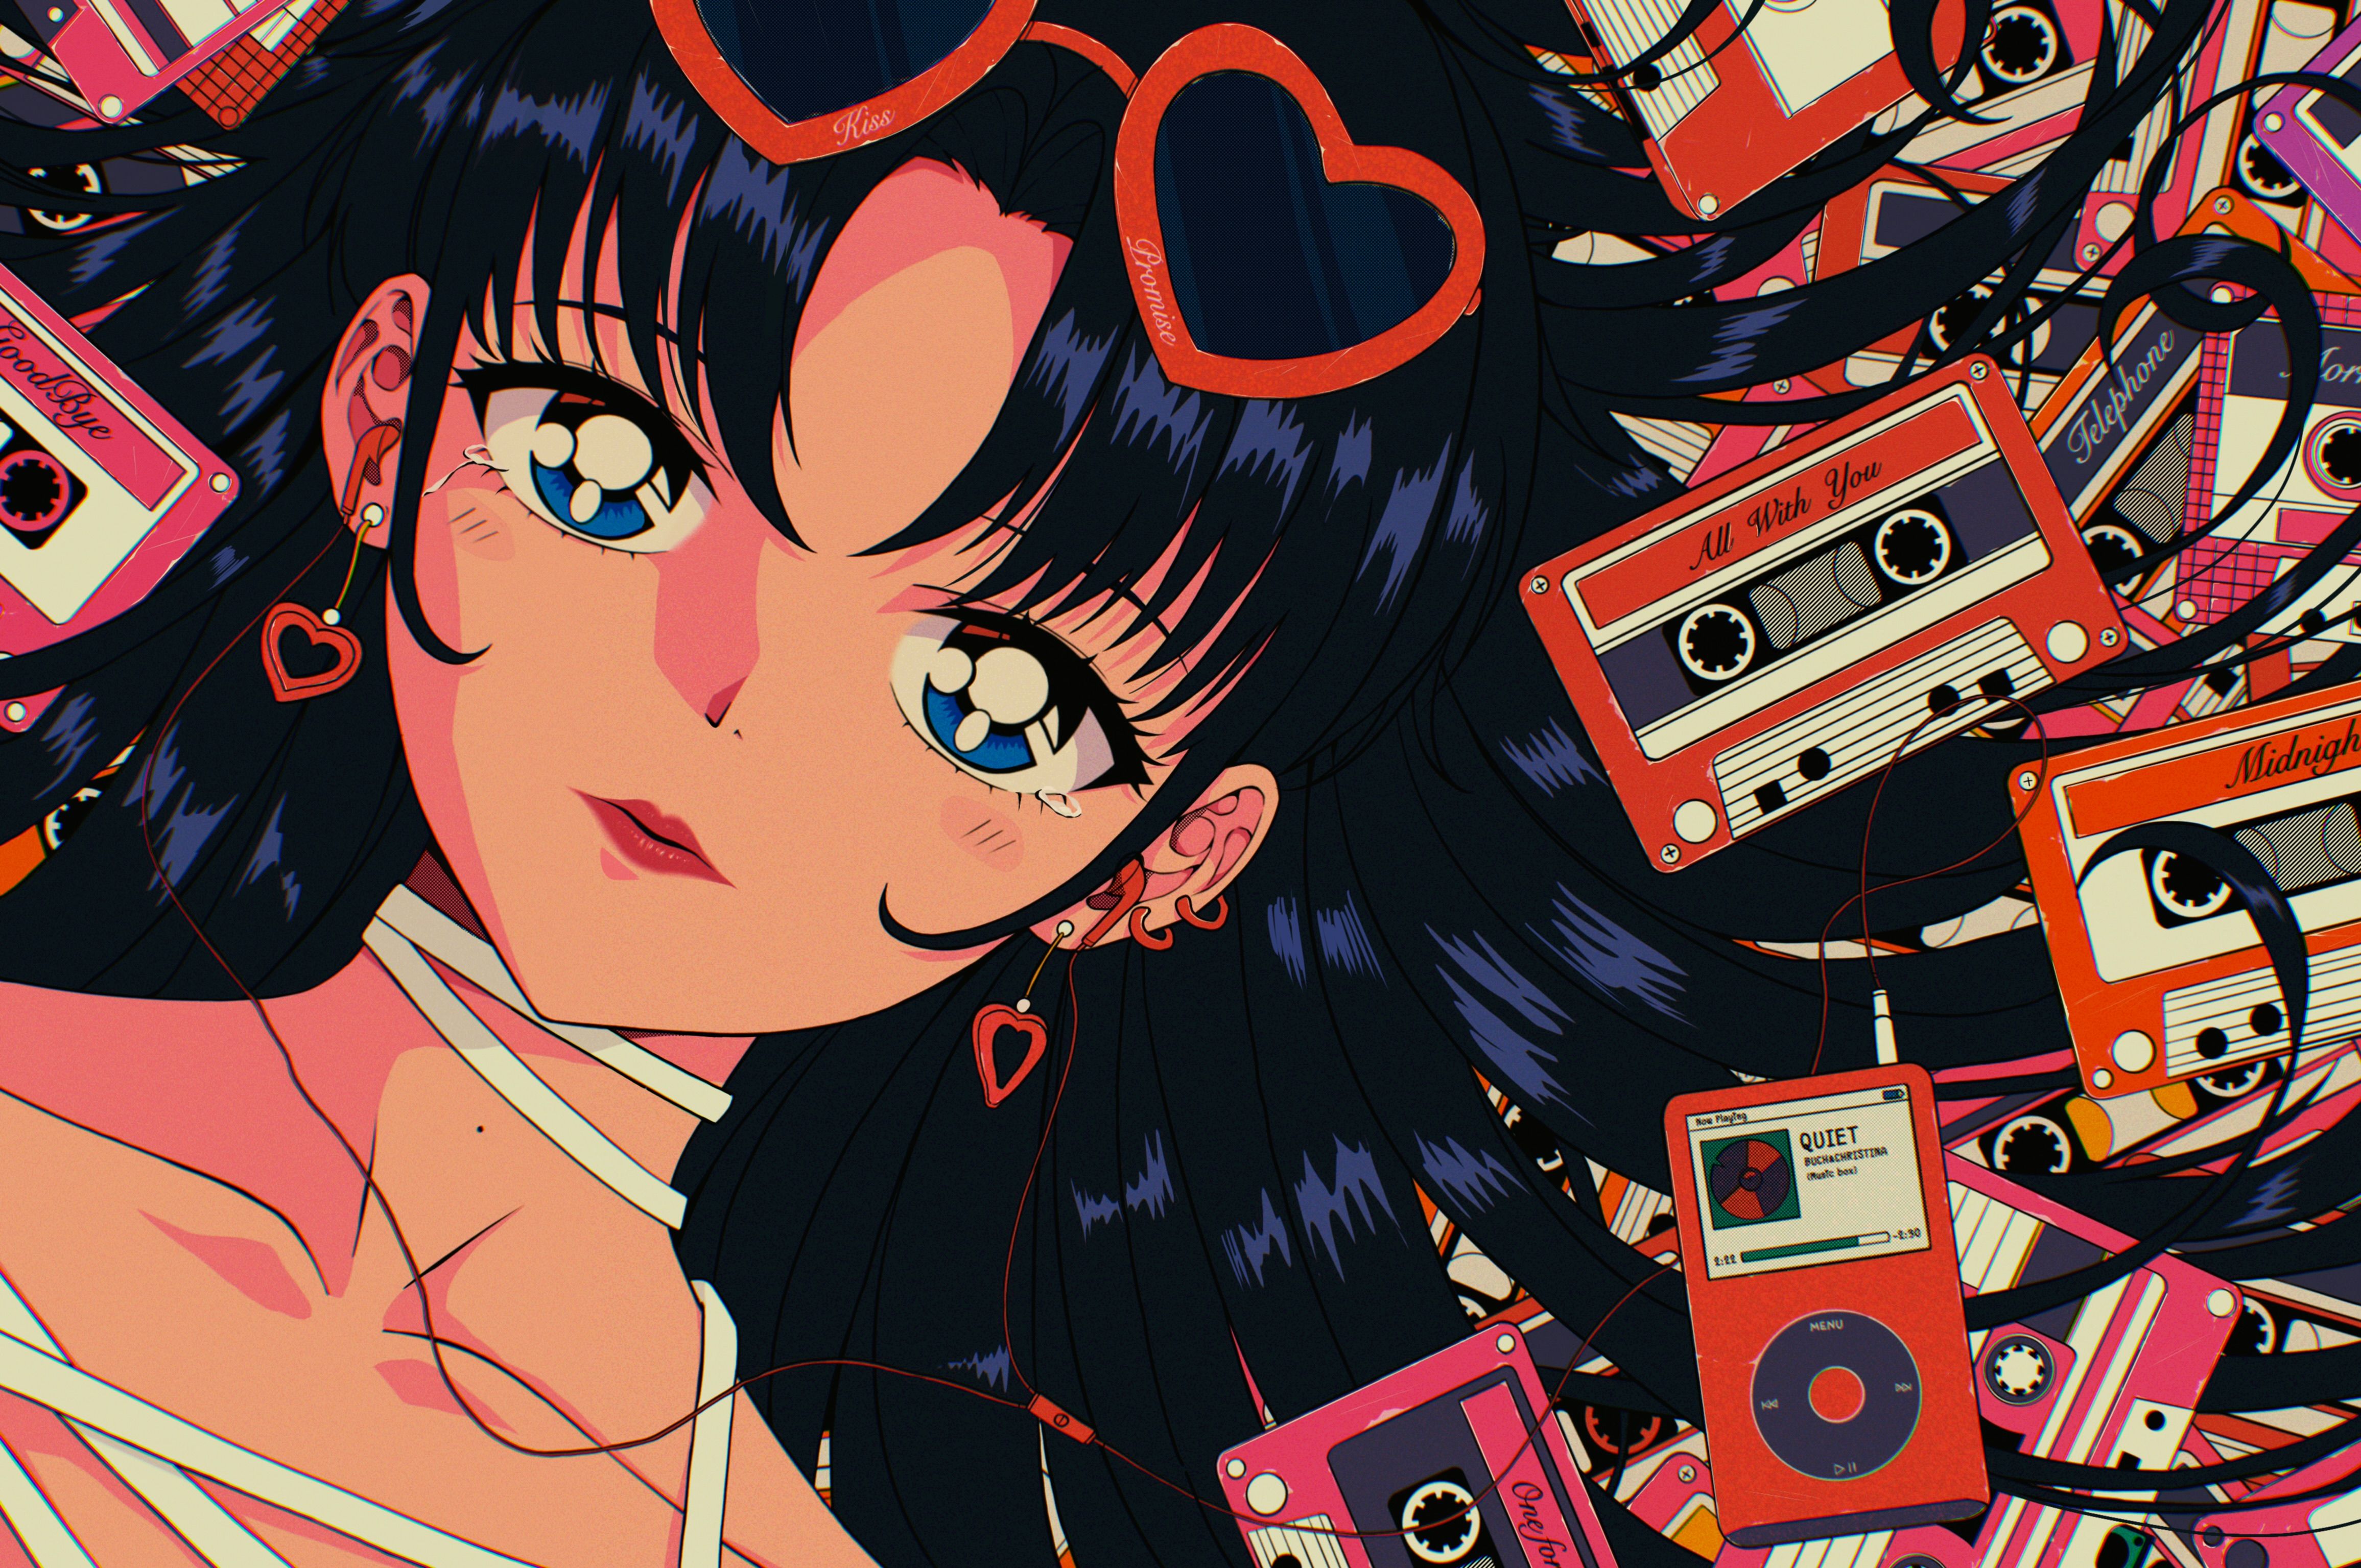 An anime girl with heart-shaped sunglasses and a bunch of audio cassettes - Sailor Mars